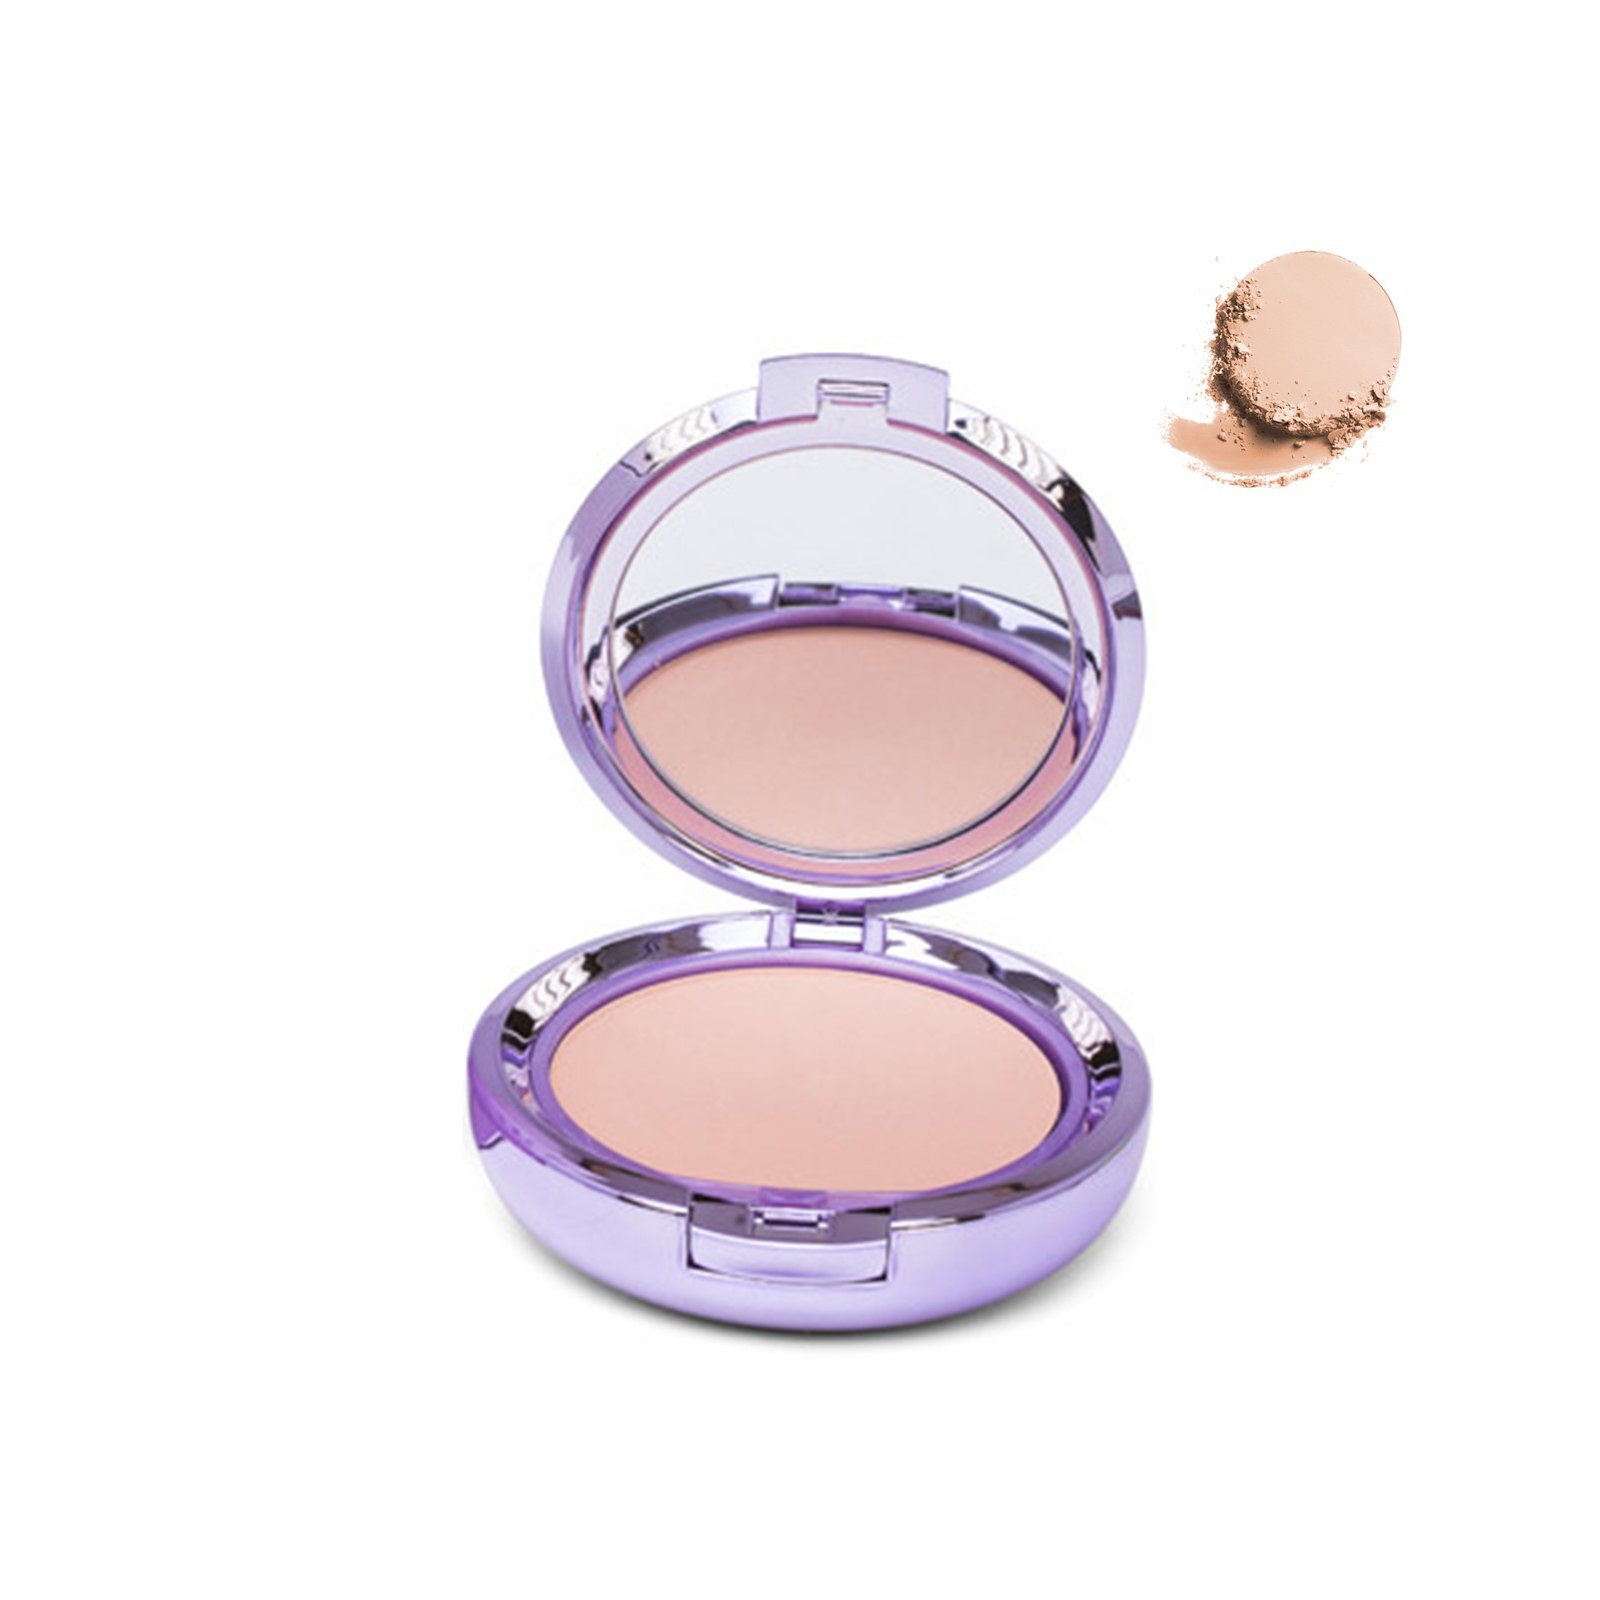 Covermark Compact Powder Oily-Acneic Skin 4 10g (0.35 oz)